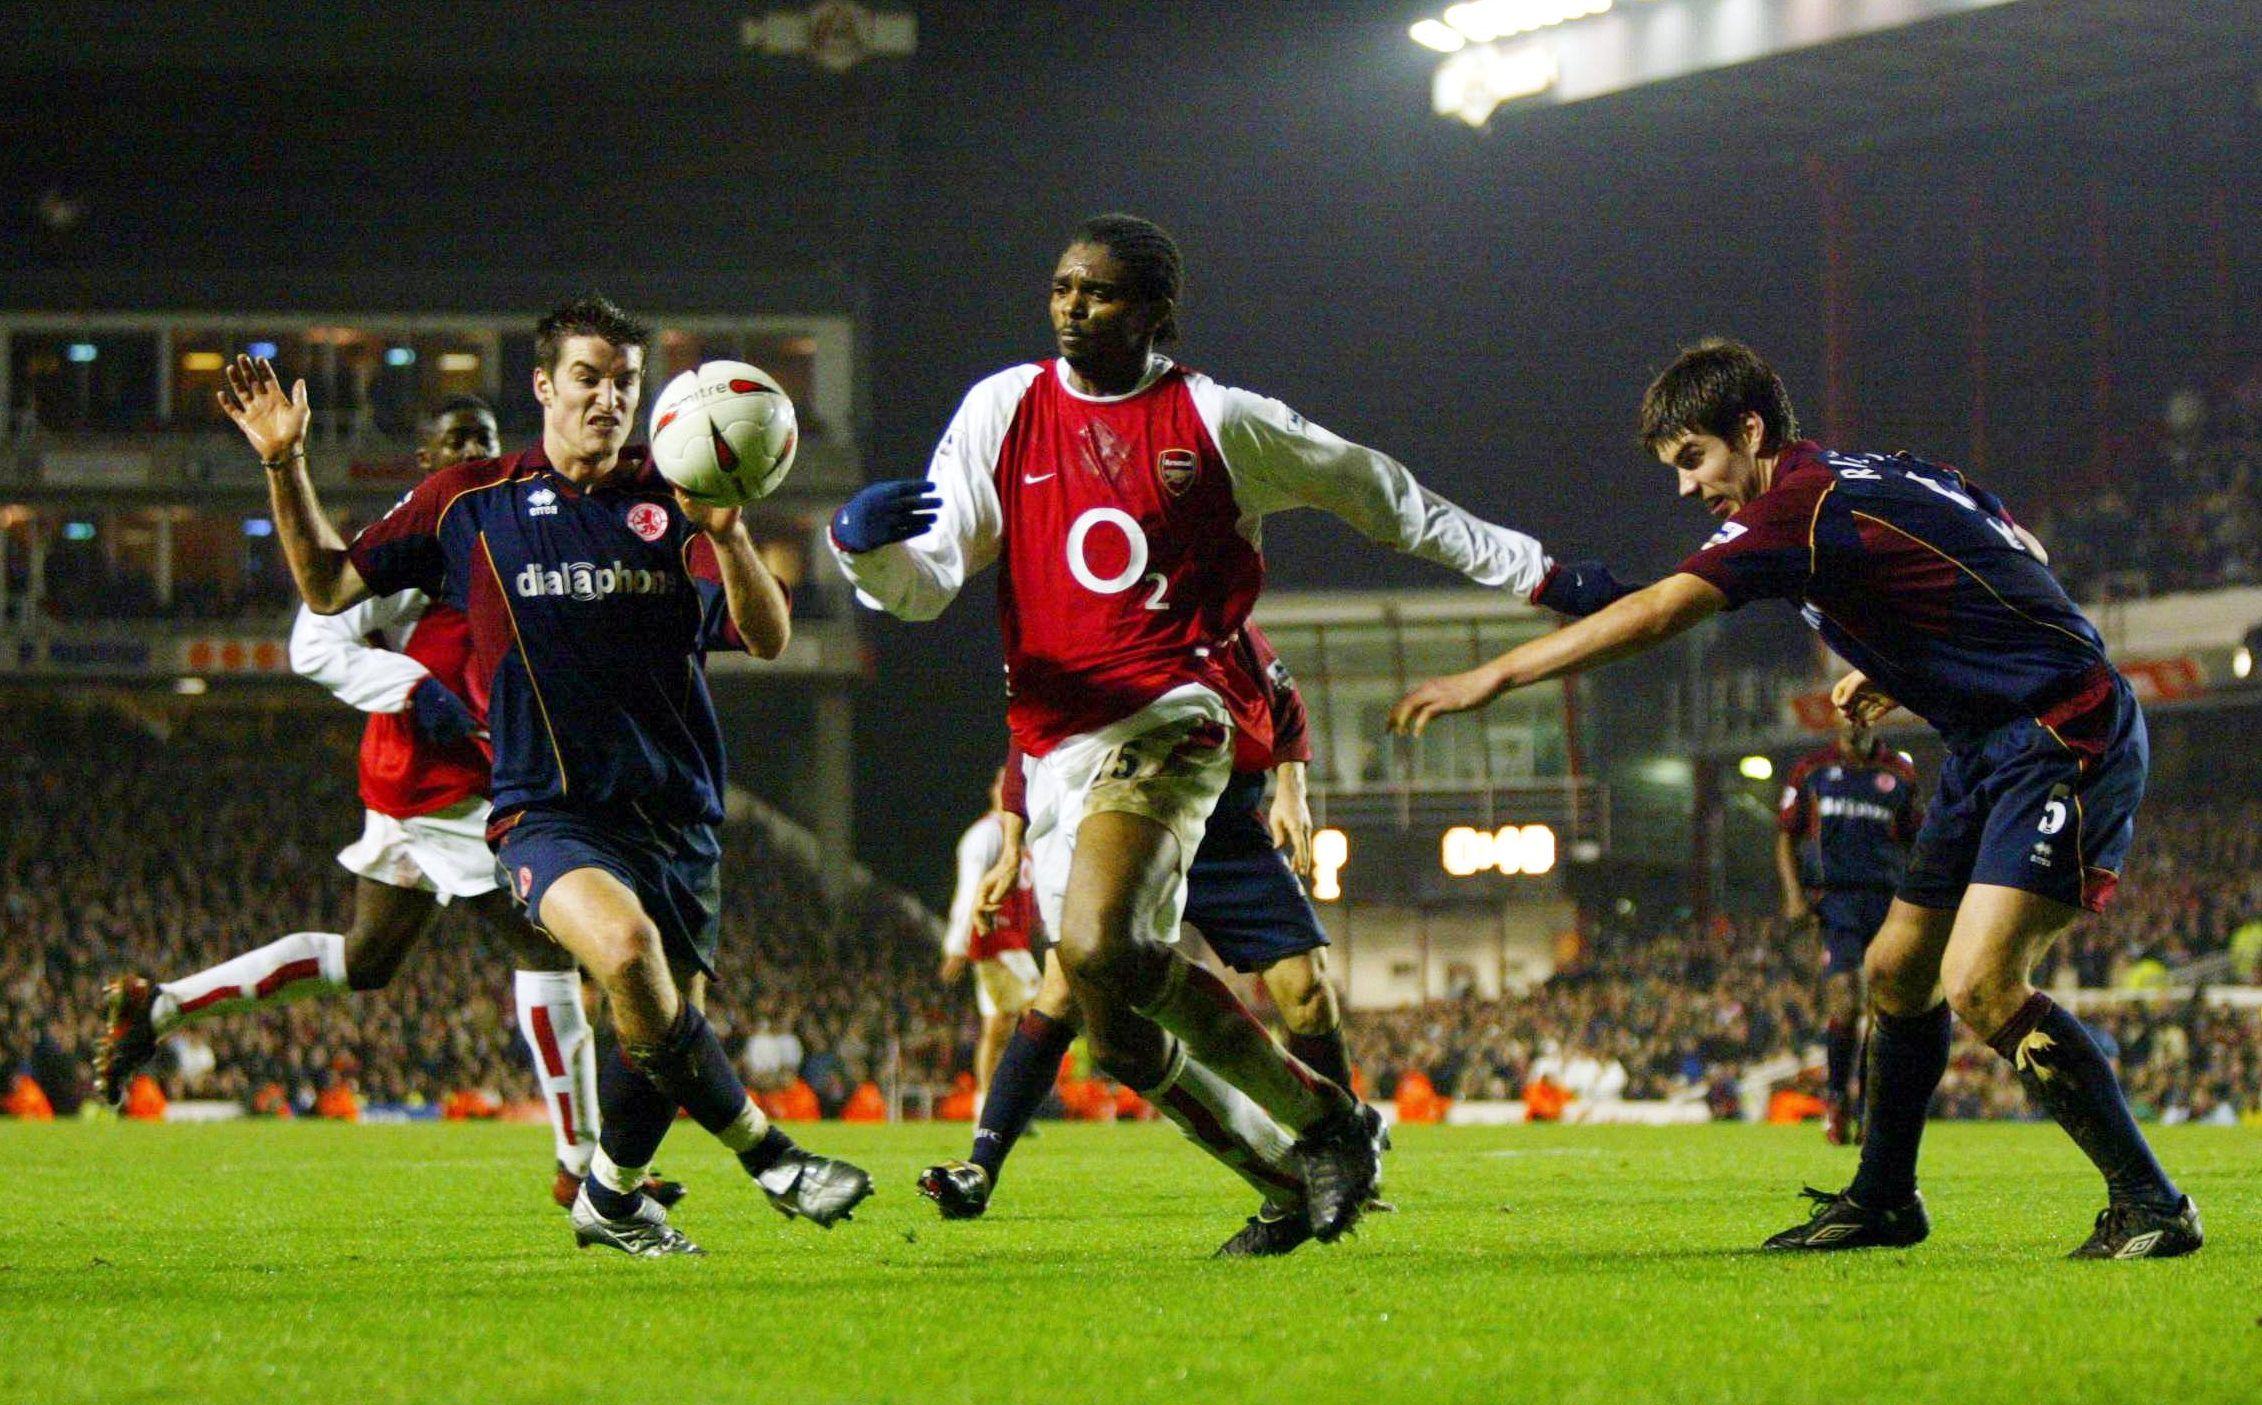 Football - Carling Cup - Semi Final First Leg - Arsenal v Middlesbrough - 20/1/04 
Middlesbrough's Guidoni Junior Doriva and Chris Riggott and Arsenal's Nwankwo Kanu in action 
Mandatory Credit : Action Images / Richard Heathcote  
Livepic